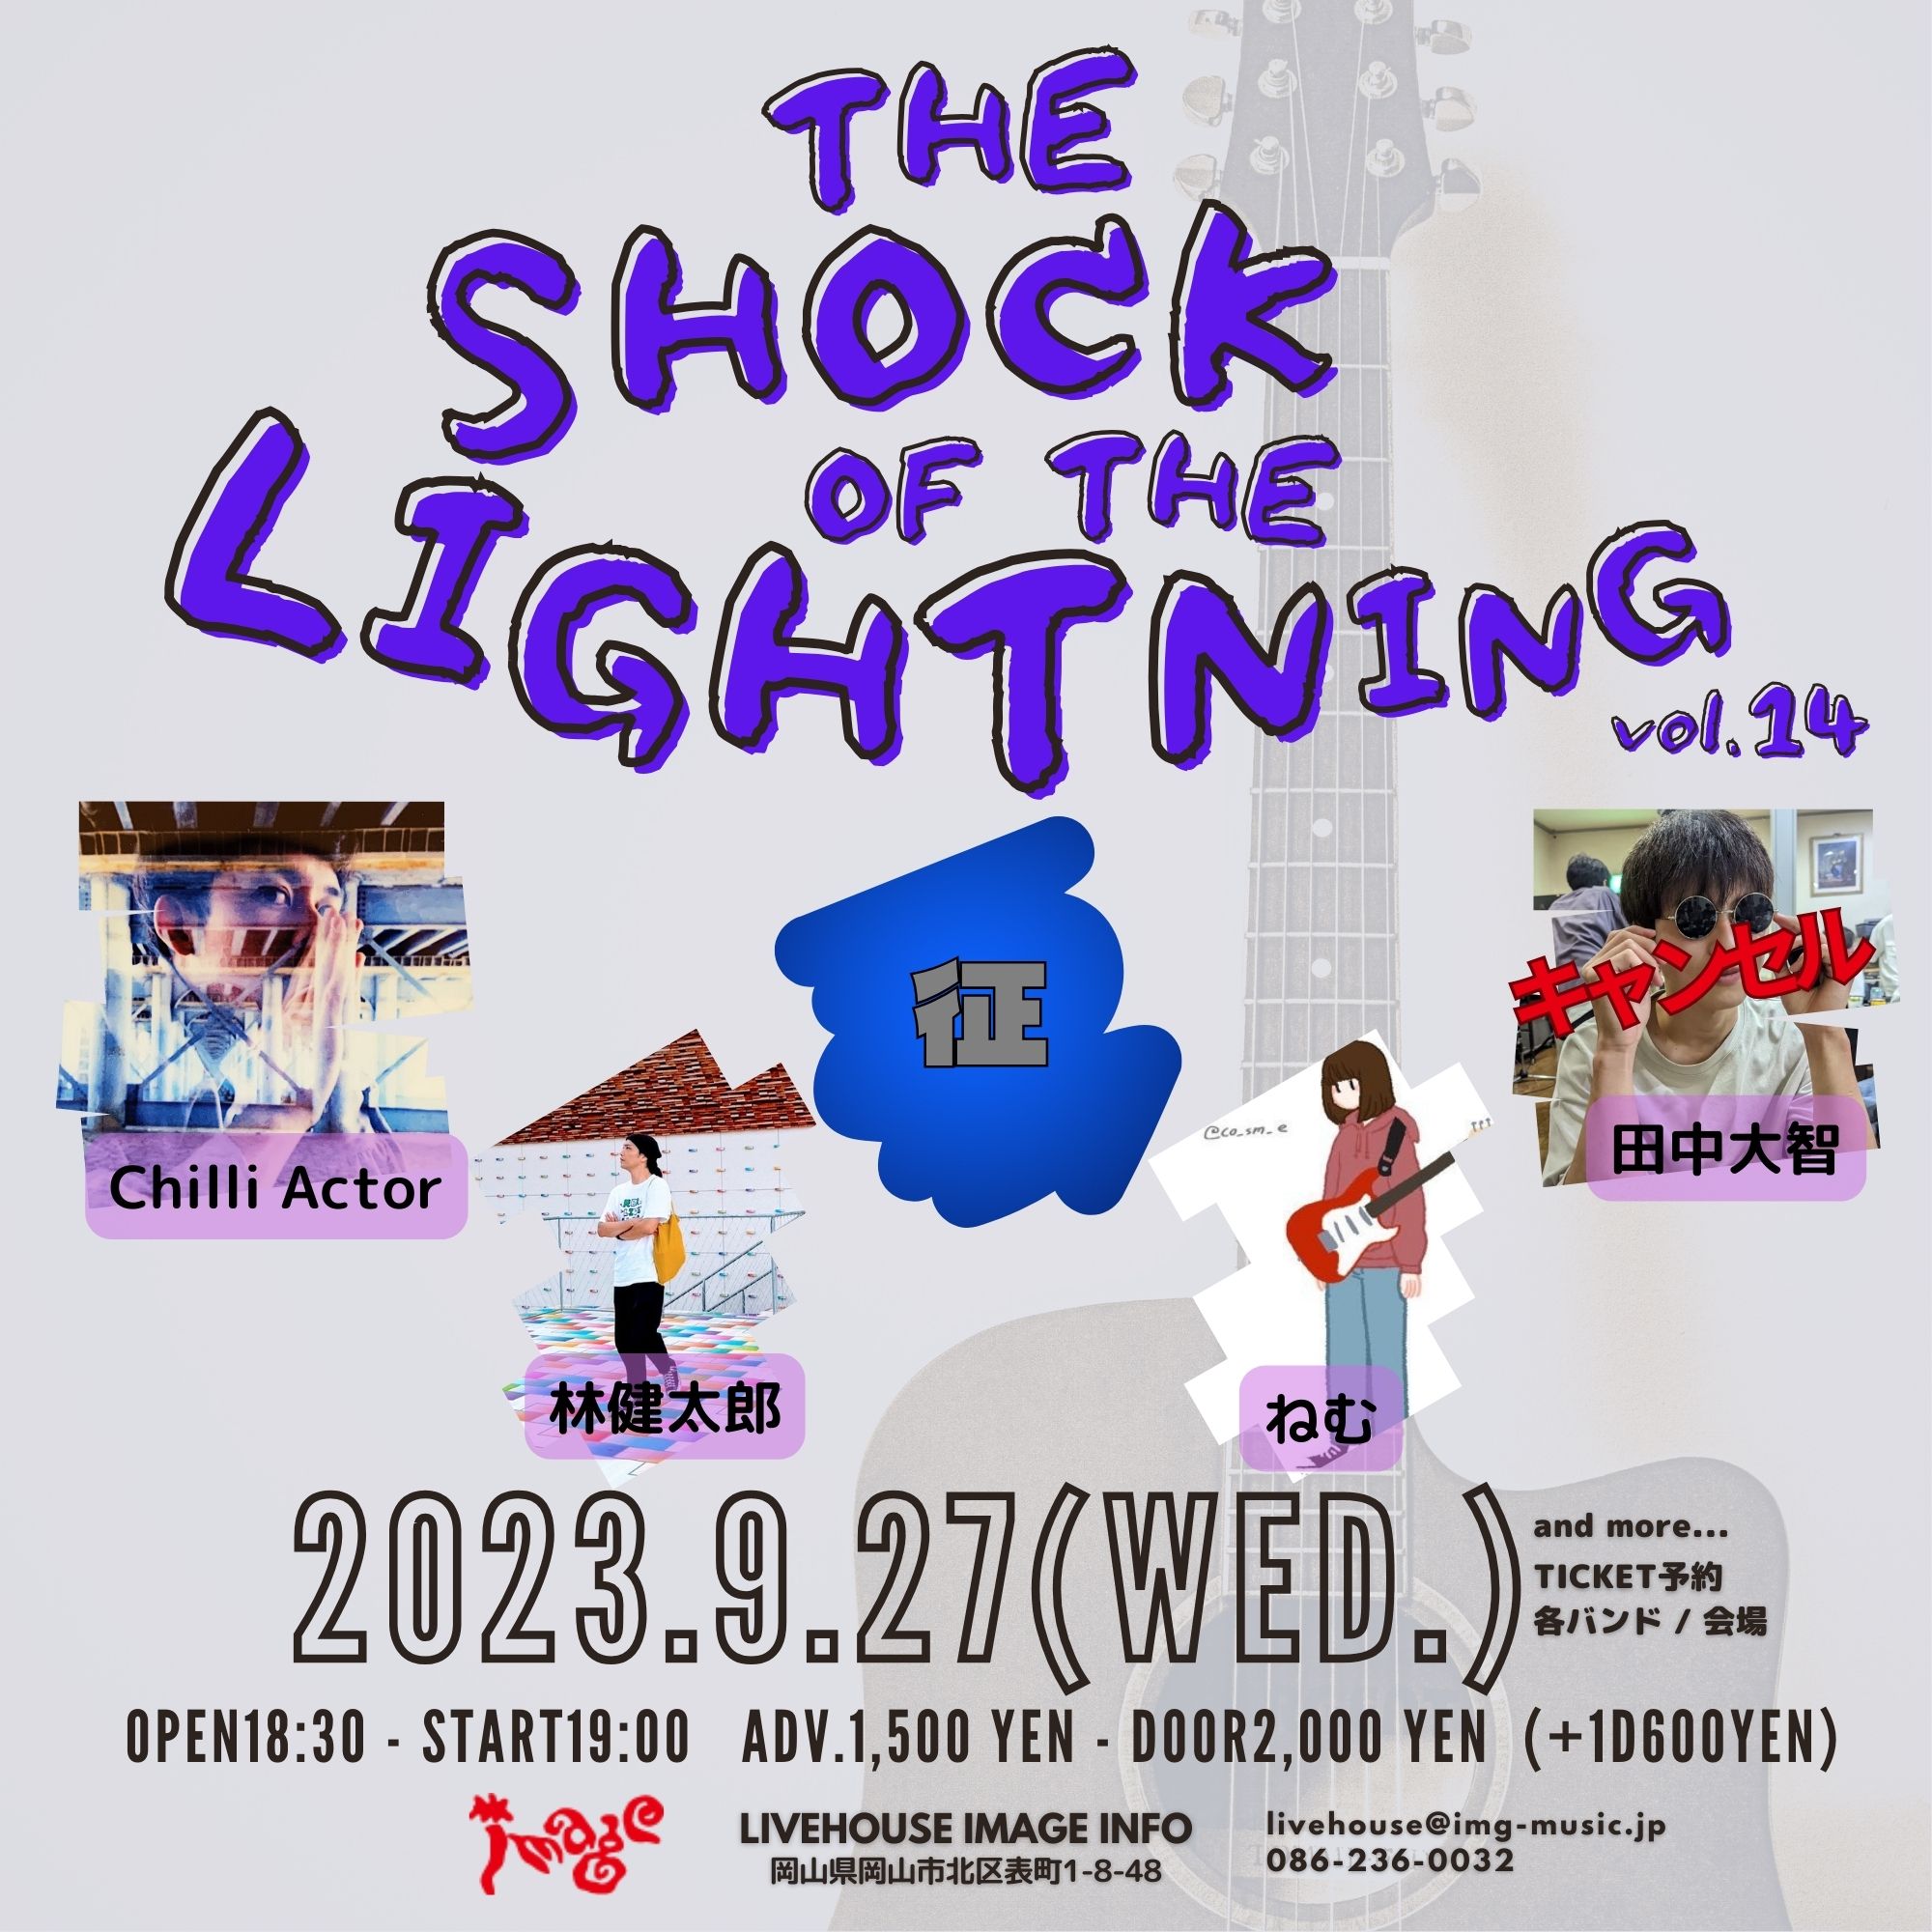 The Shock of the Lightning vol.14